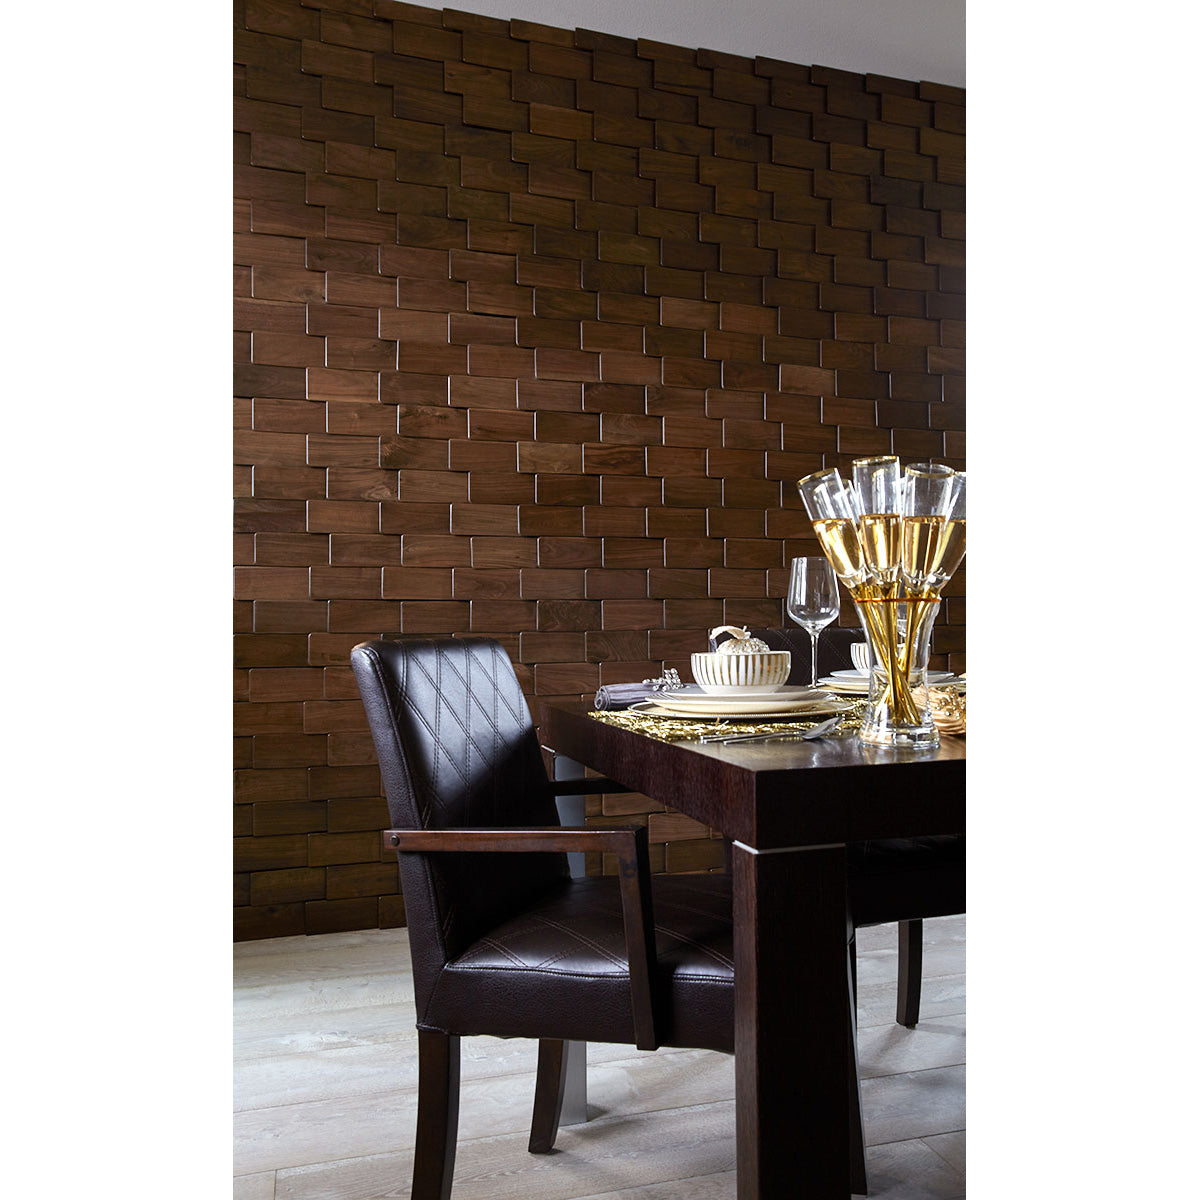 DuChateau - Scale Reckt Wall Coverings - Room Scene